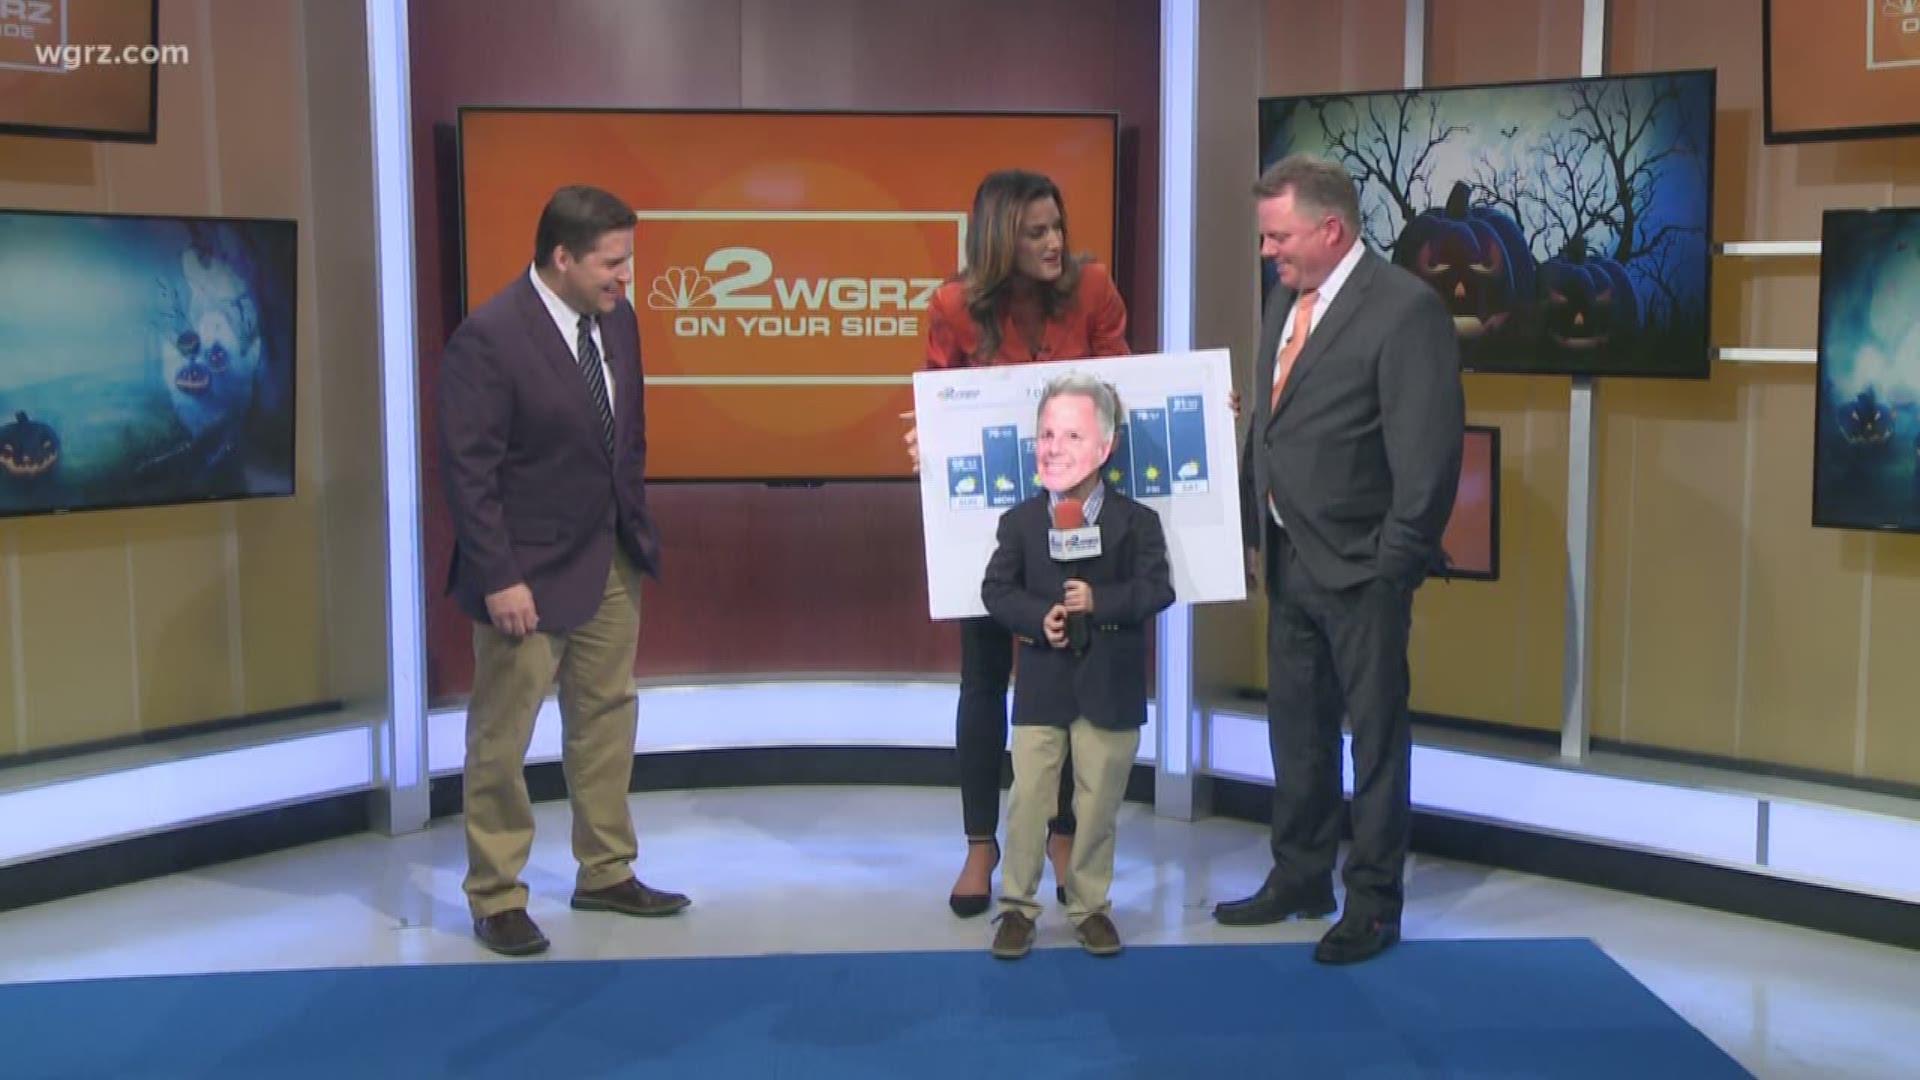 It's a Halloween surprise for chief meteorologist Patrick Hammer. 5-yr-old Elliott, son of Daybreak co-anchor Melissa Holmes, dressed up as Patrick for Halloween!